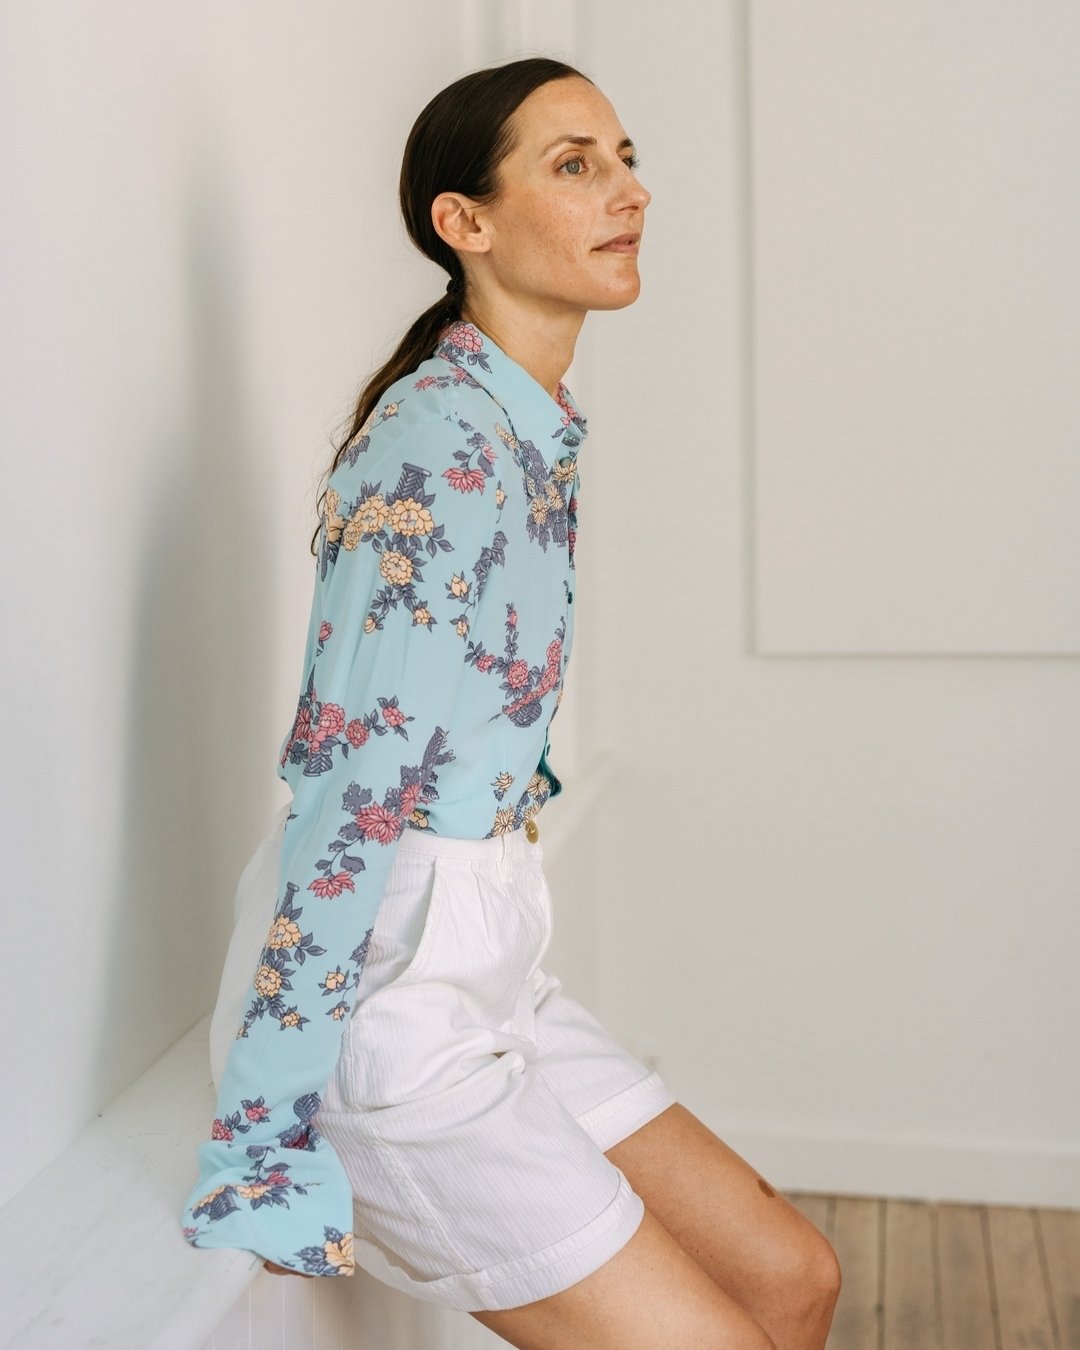 Effortlessly bright, bold and cheerful, yet elegant. This Rayon Jersey blouse is top-quality, with the loveliest handle and a light but sturdy weight, characteristic of the first Rayon cloths produced around this time. A true piece of history, reimag